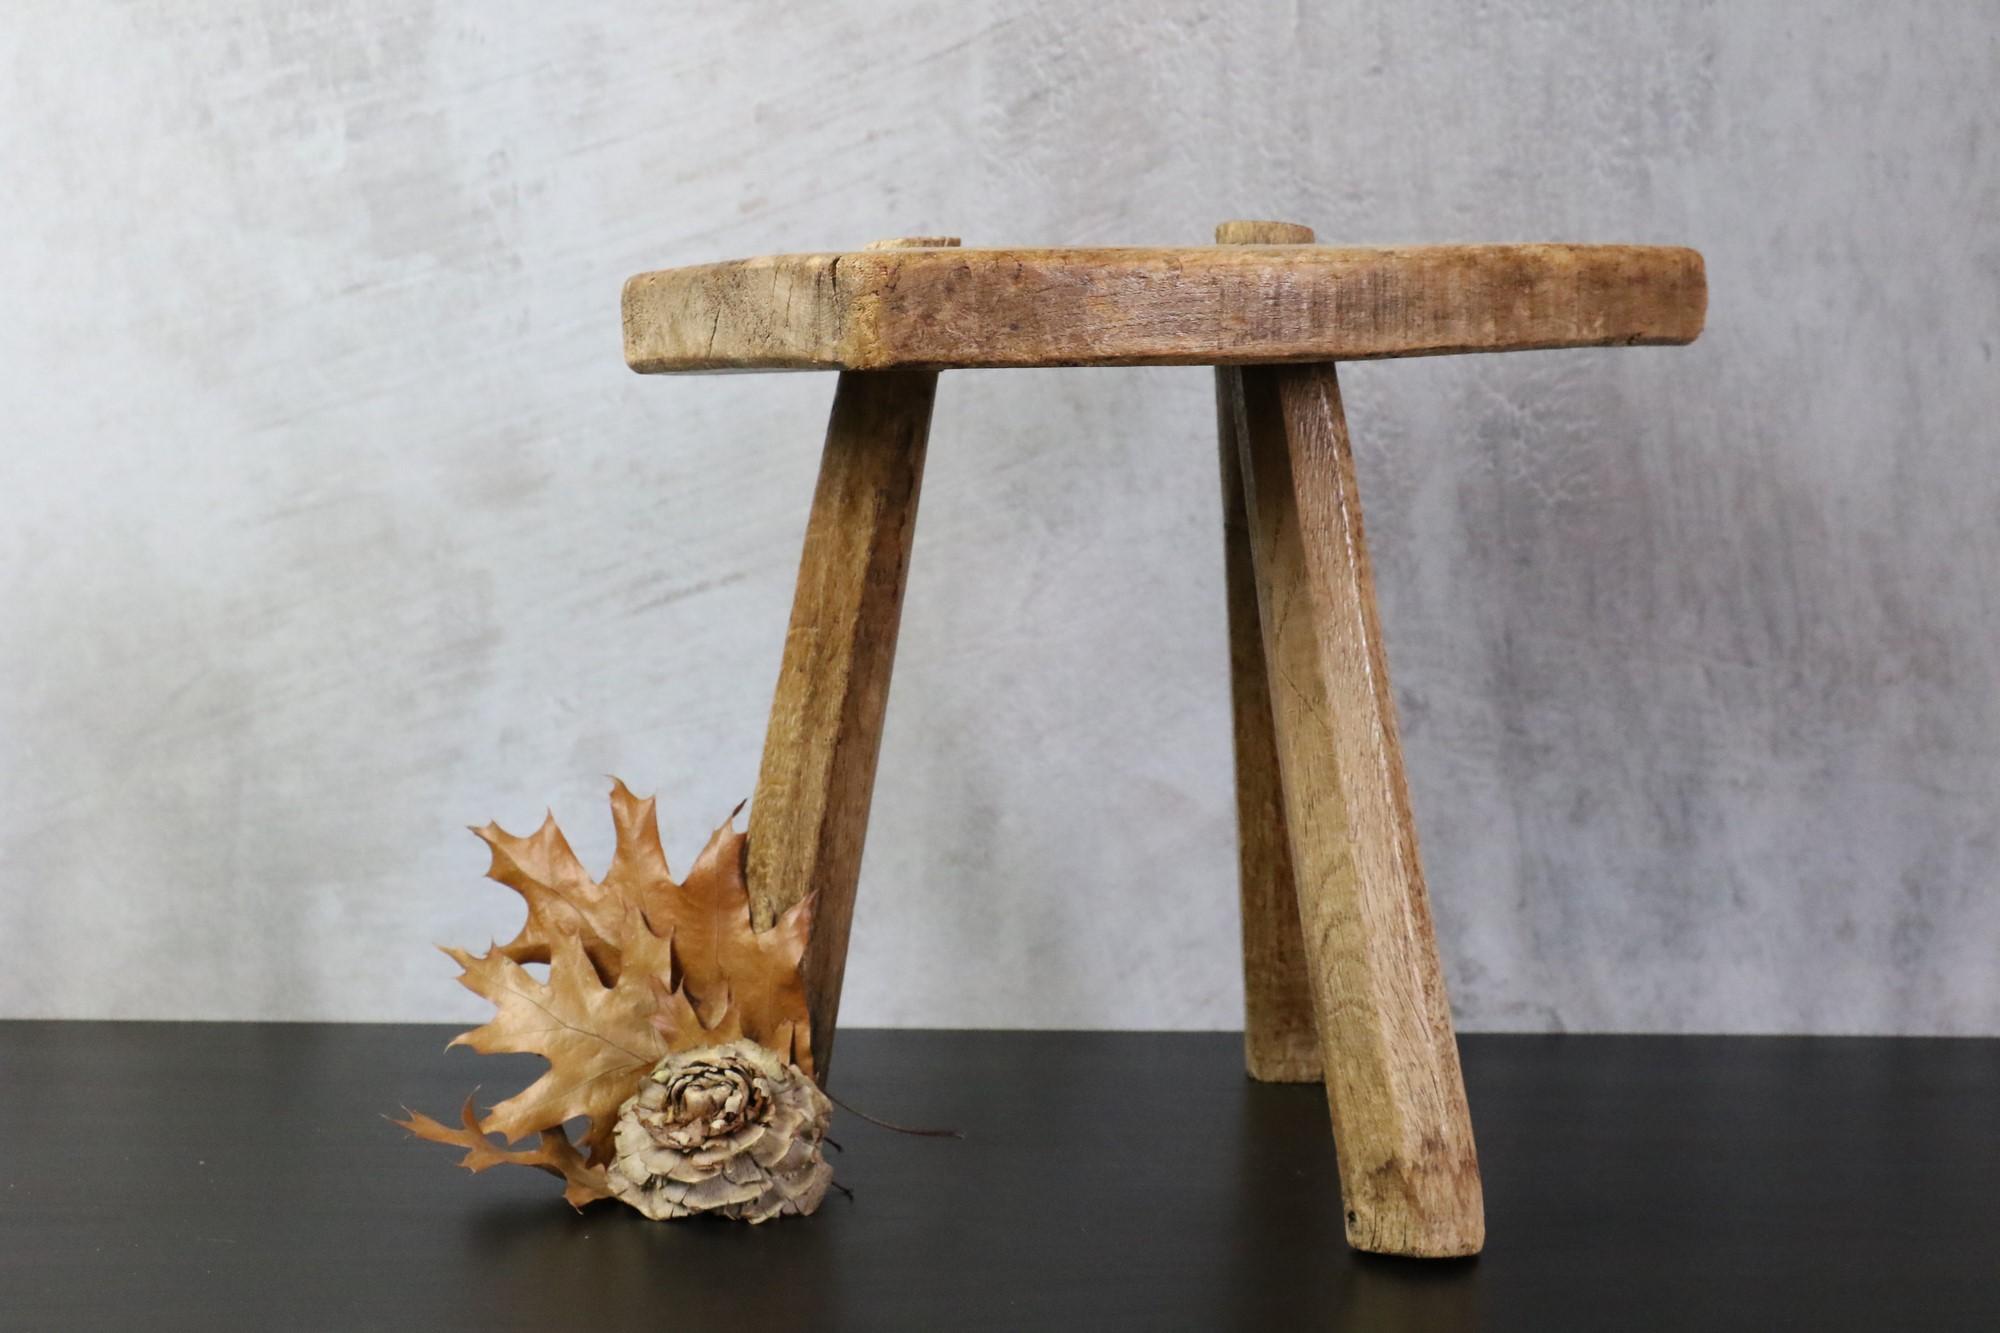 Primitive Wooden Brutalist Stool, Milking Stool, French, Folk Art, circa 1900 In Good Condition For Sale In Camblanes et Meynac, FR